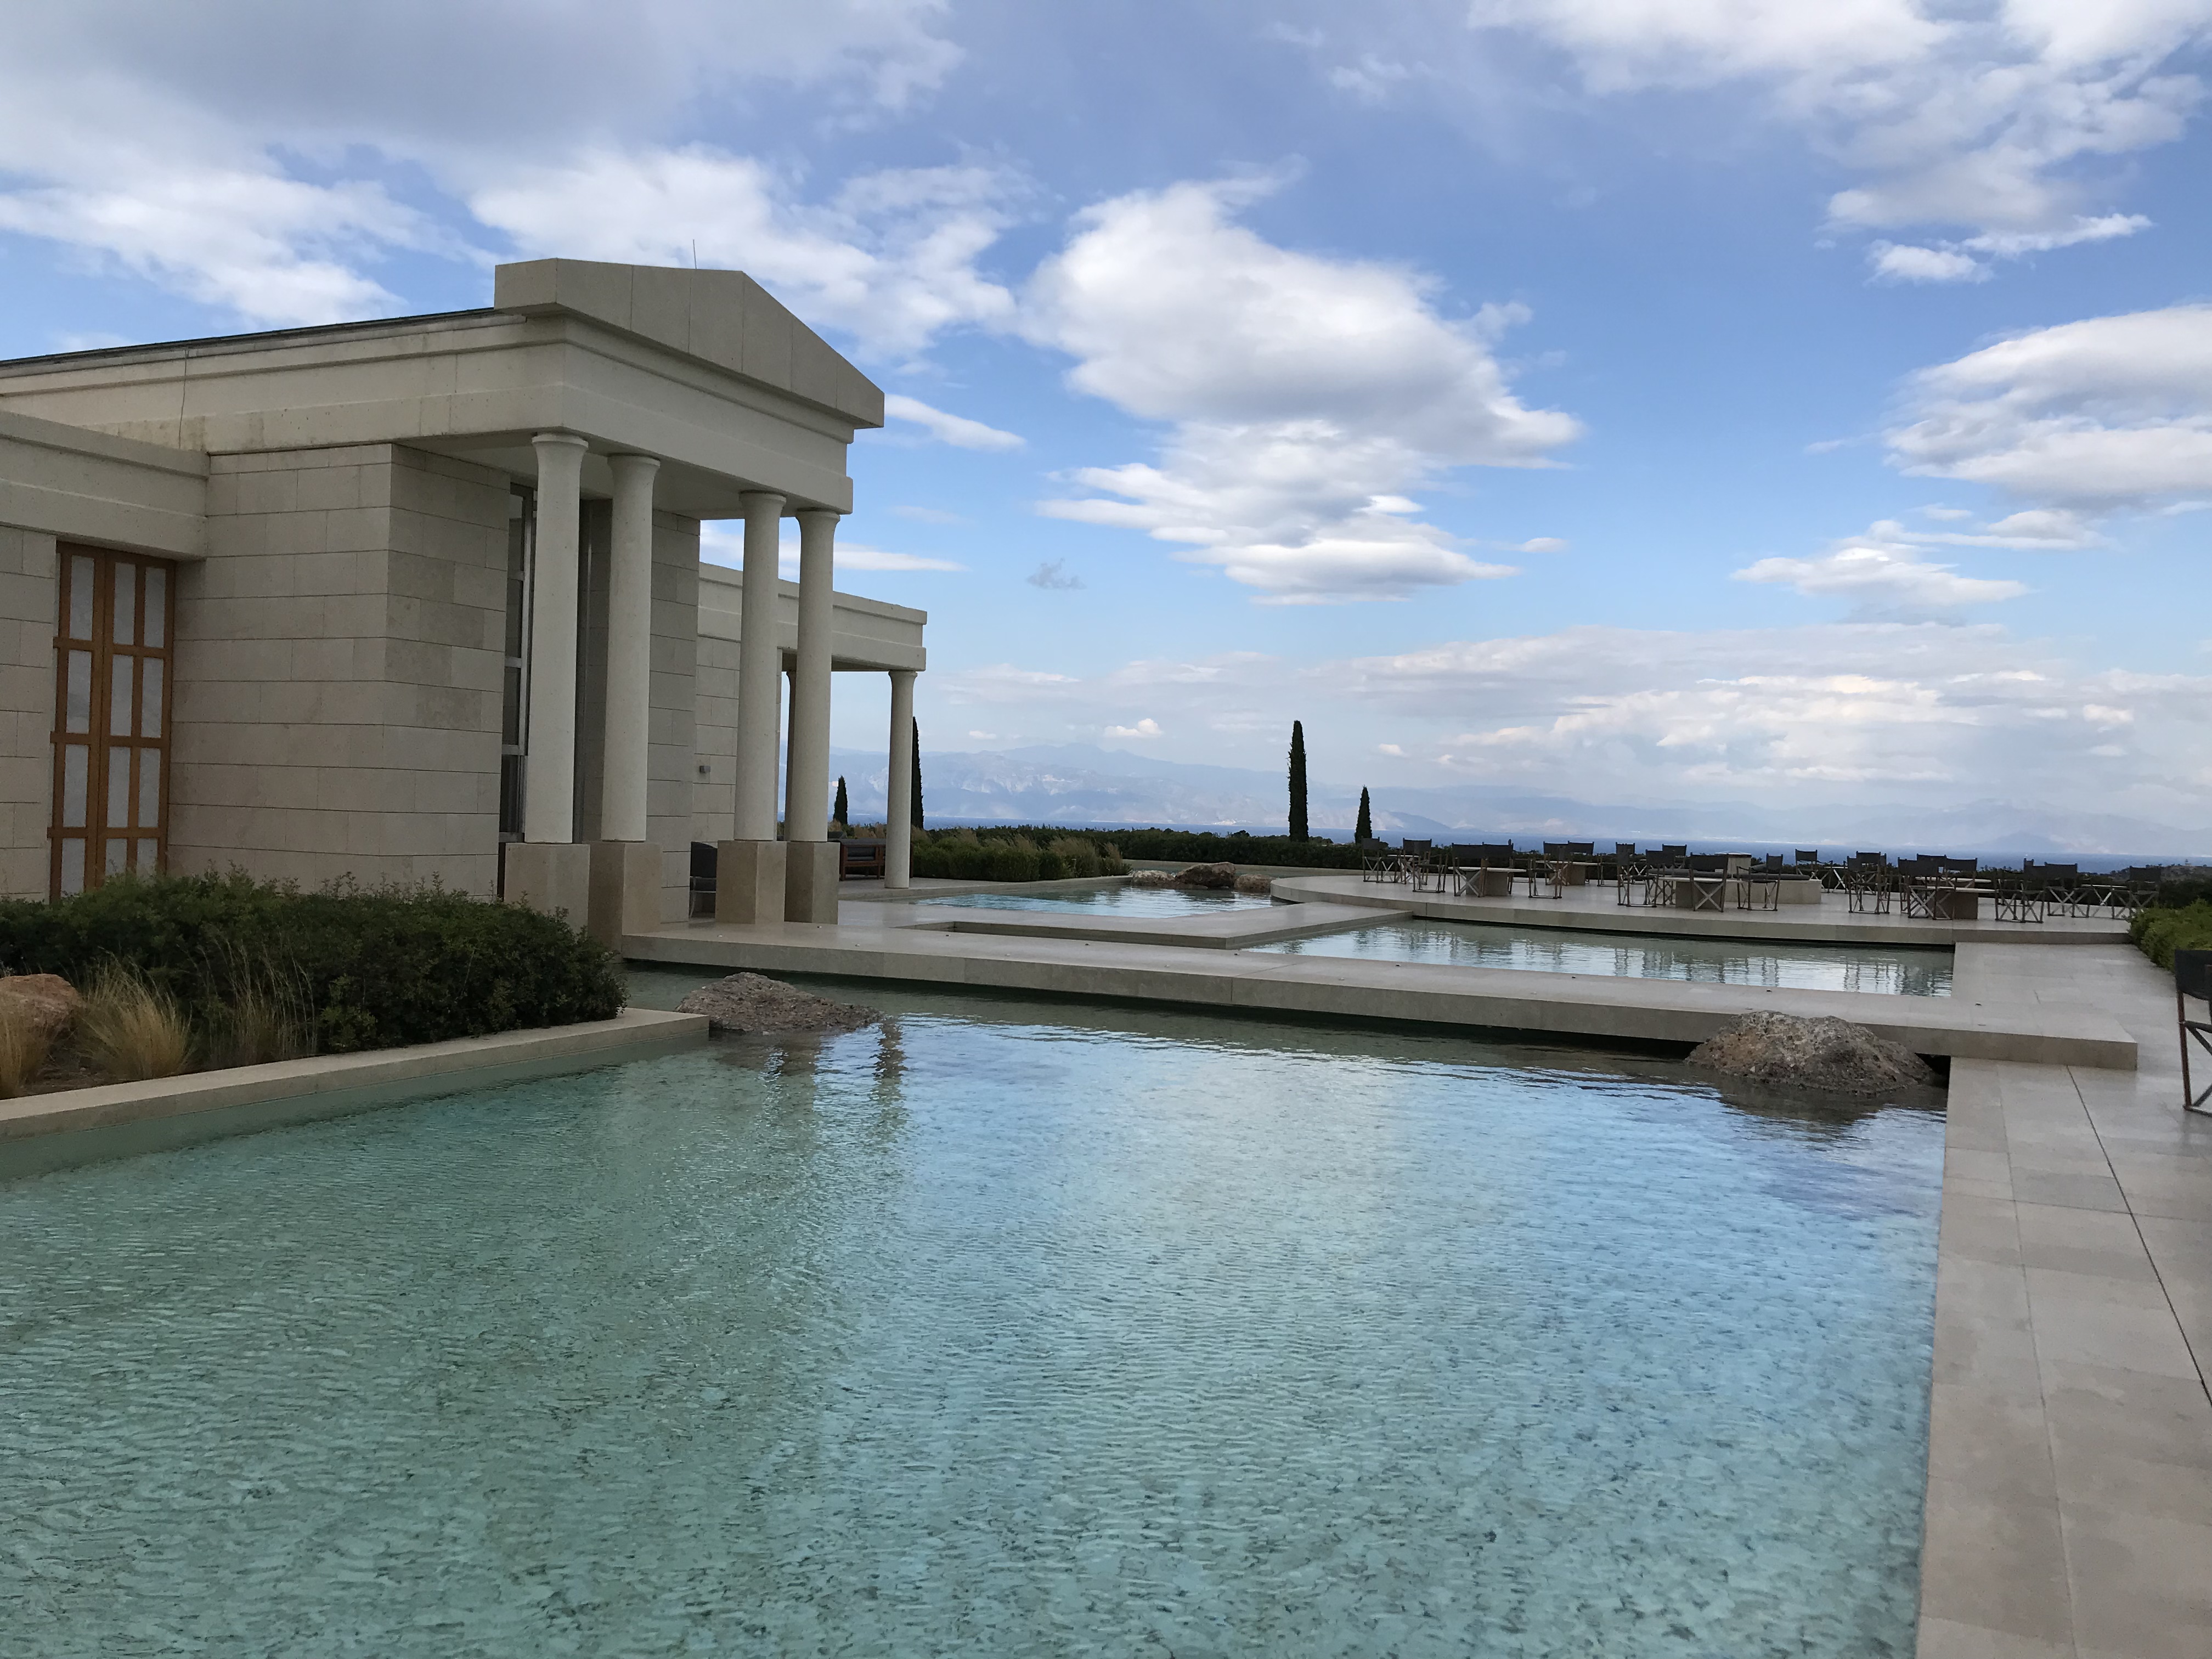 AmanZoe - finally - our first stay - September ' 19 :) - Hotel Reviews